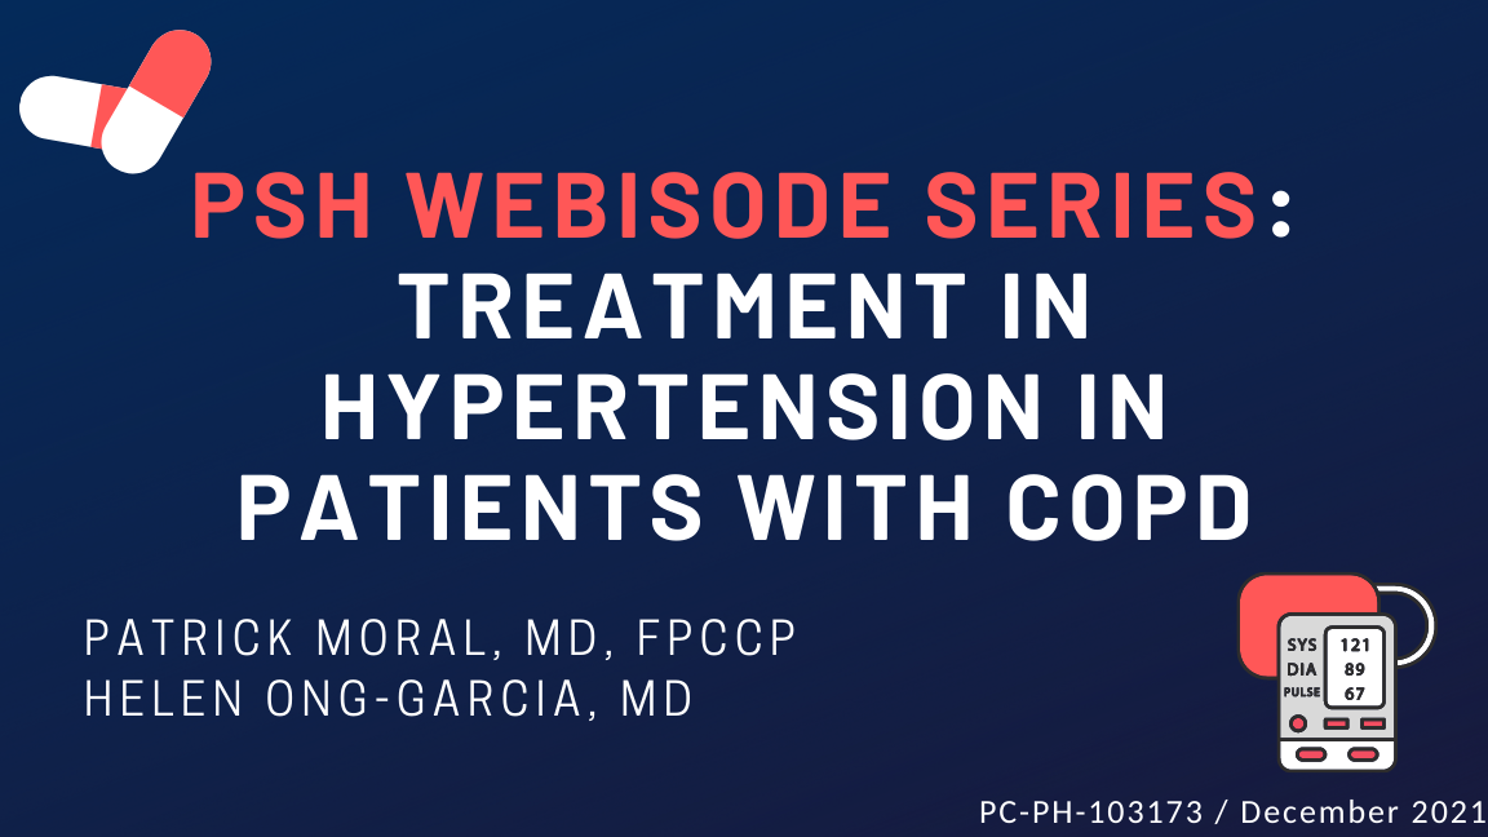 PSH Webisode Series: Treatment in Hypertension in Patients with COPD